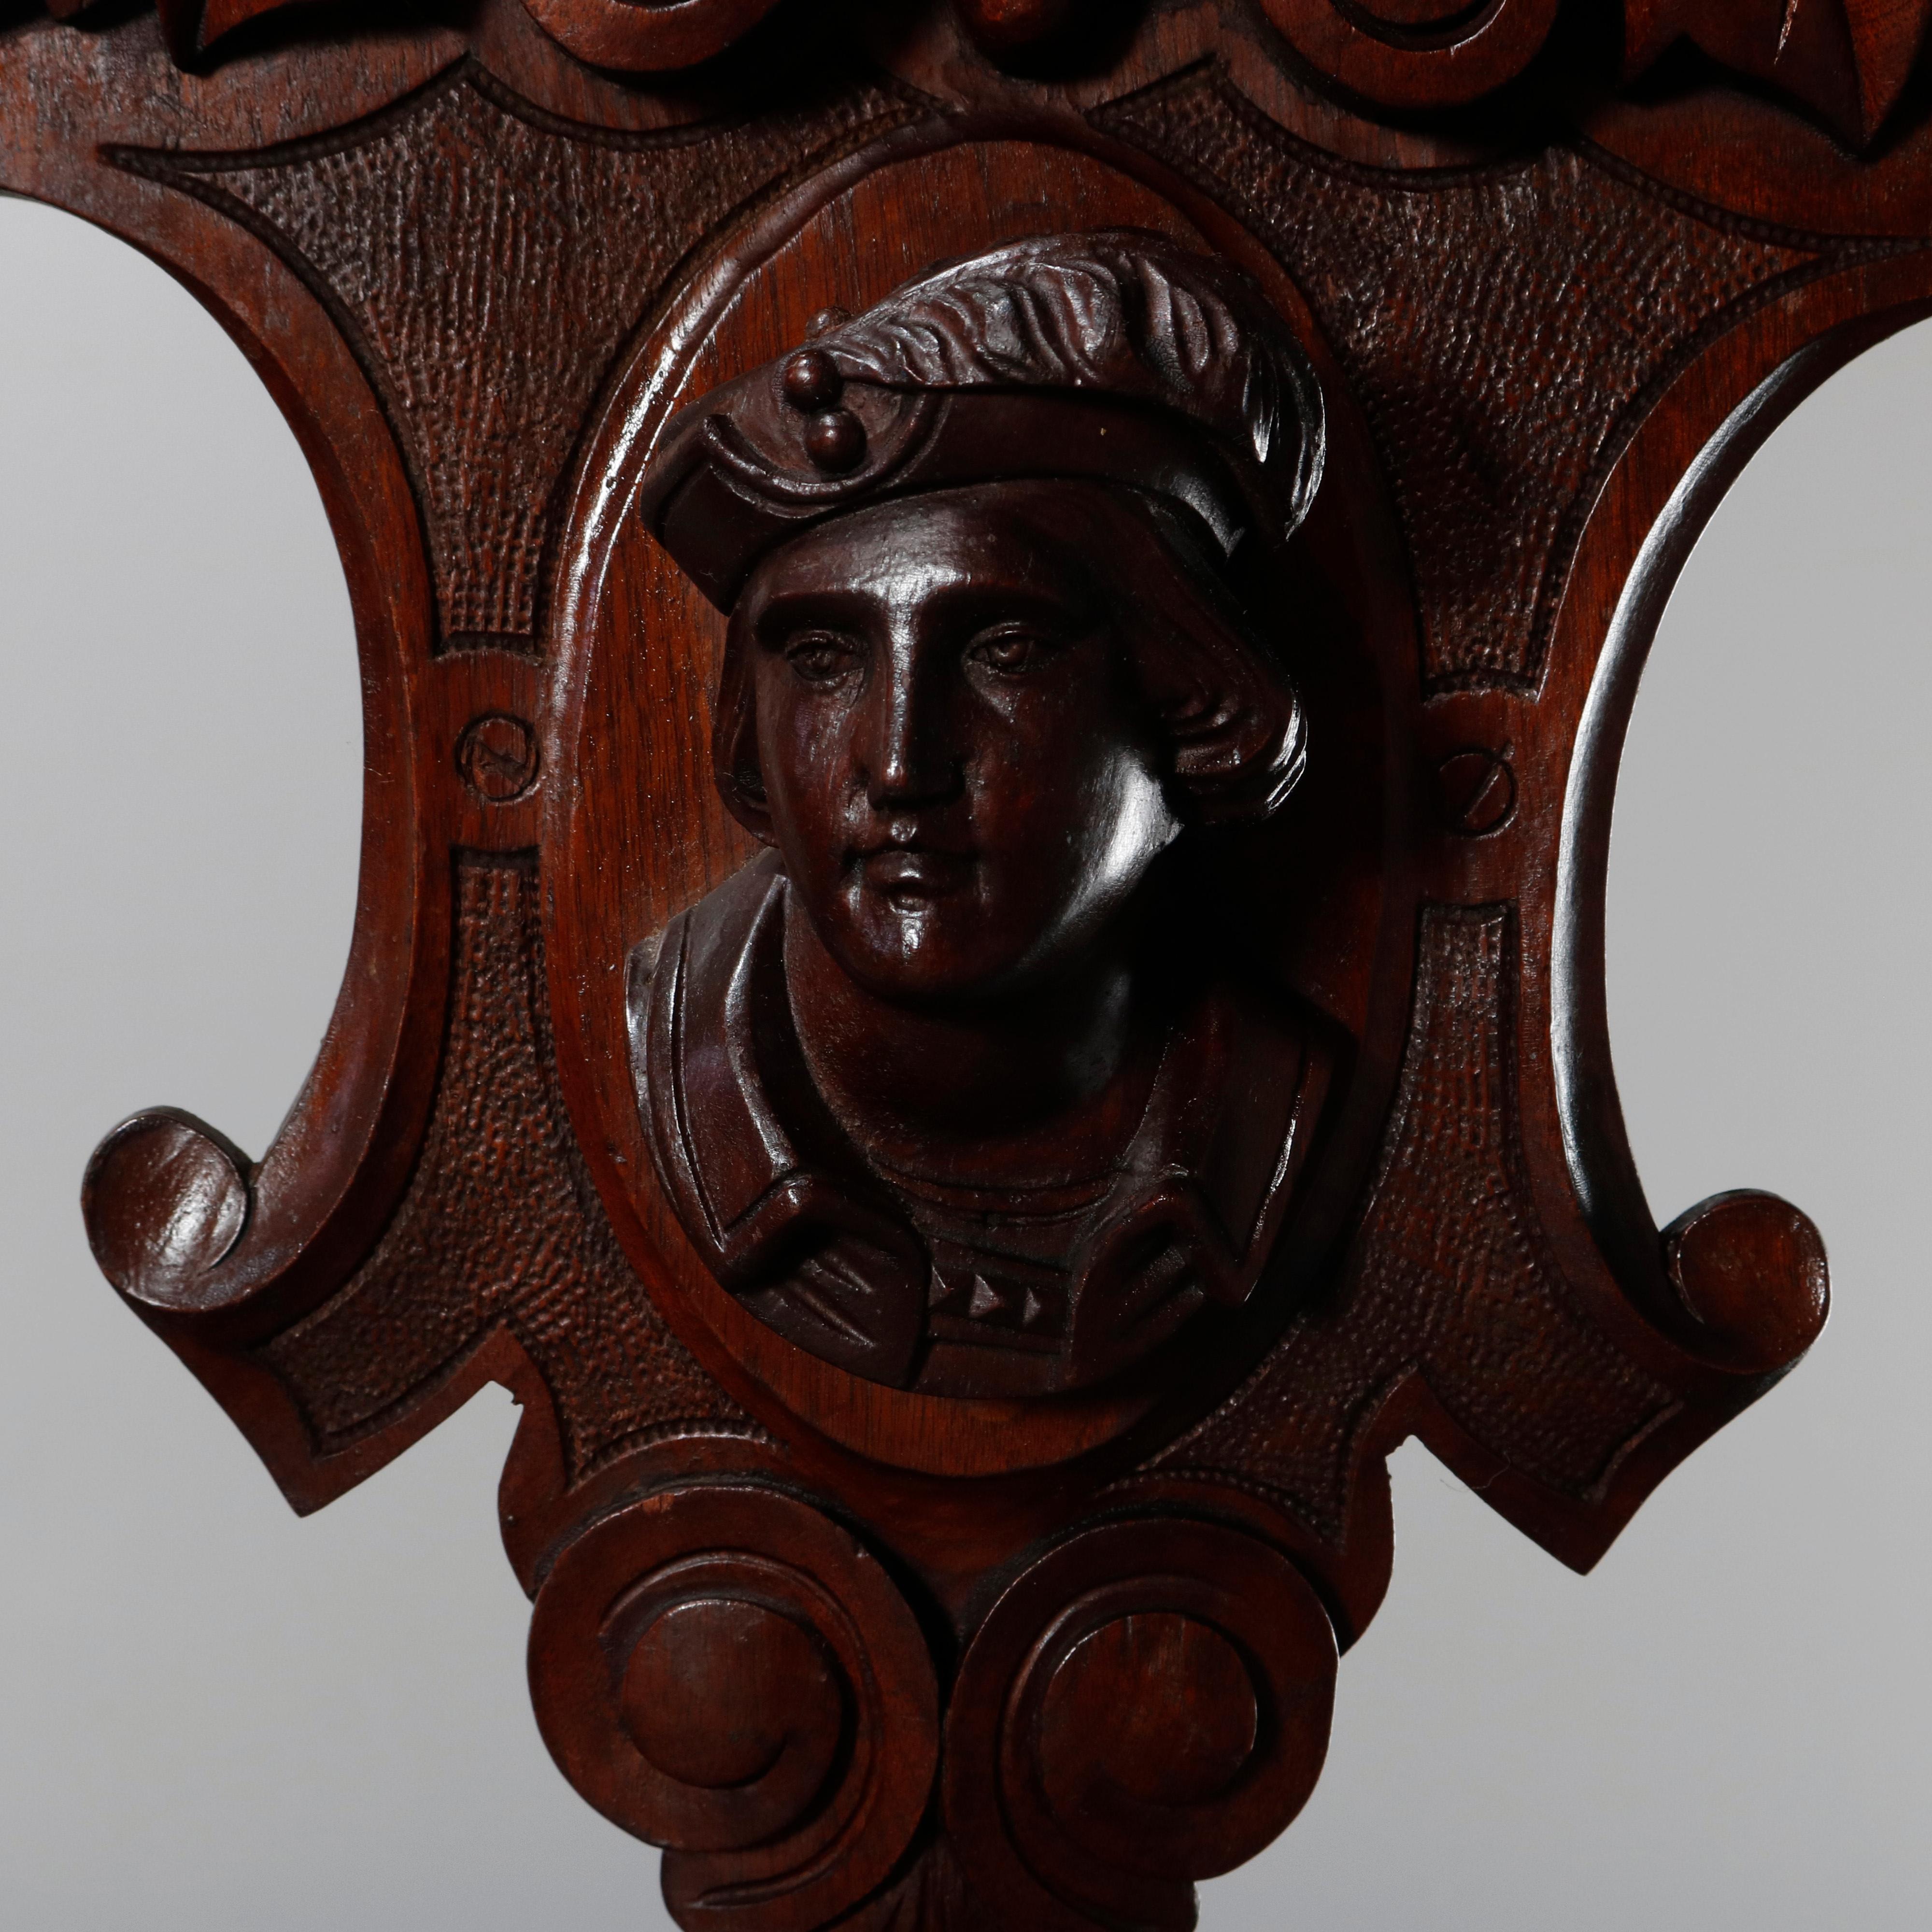 An antique figural Victorian Jelliffe school architectural pediment offers carved walnut in shield form with palmette and foliate scroll crest surmounting central male portrait mask, circa 1870.

***DELIVERY NOTICE – Due to COVID-19 we are employing